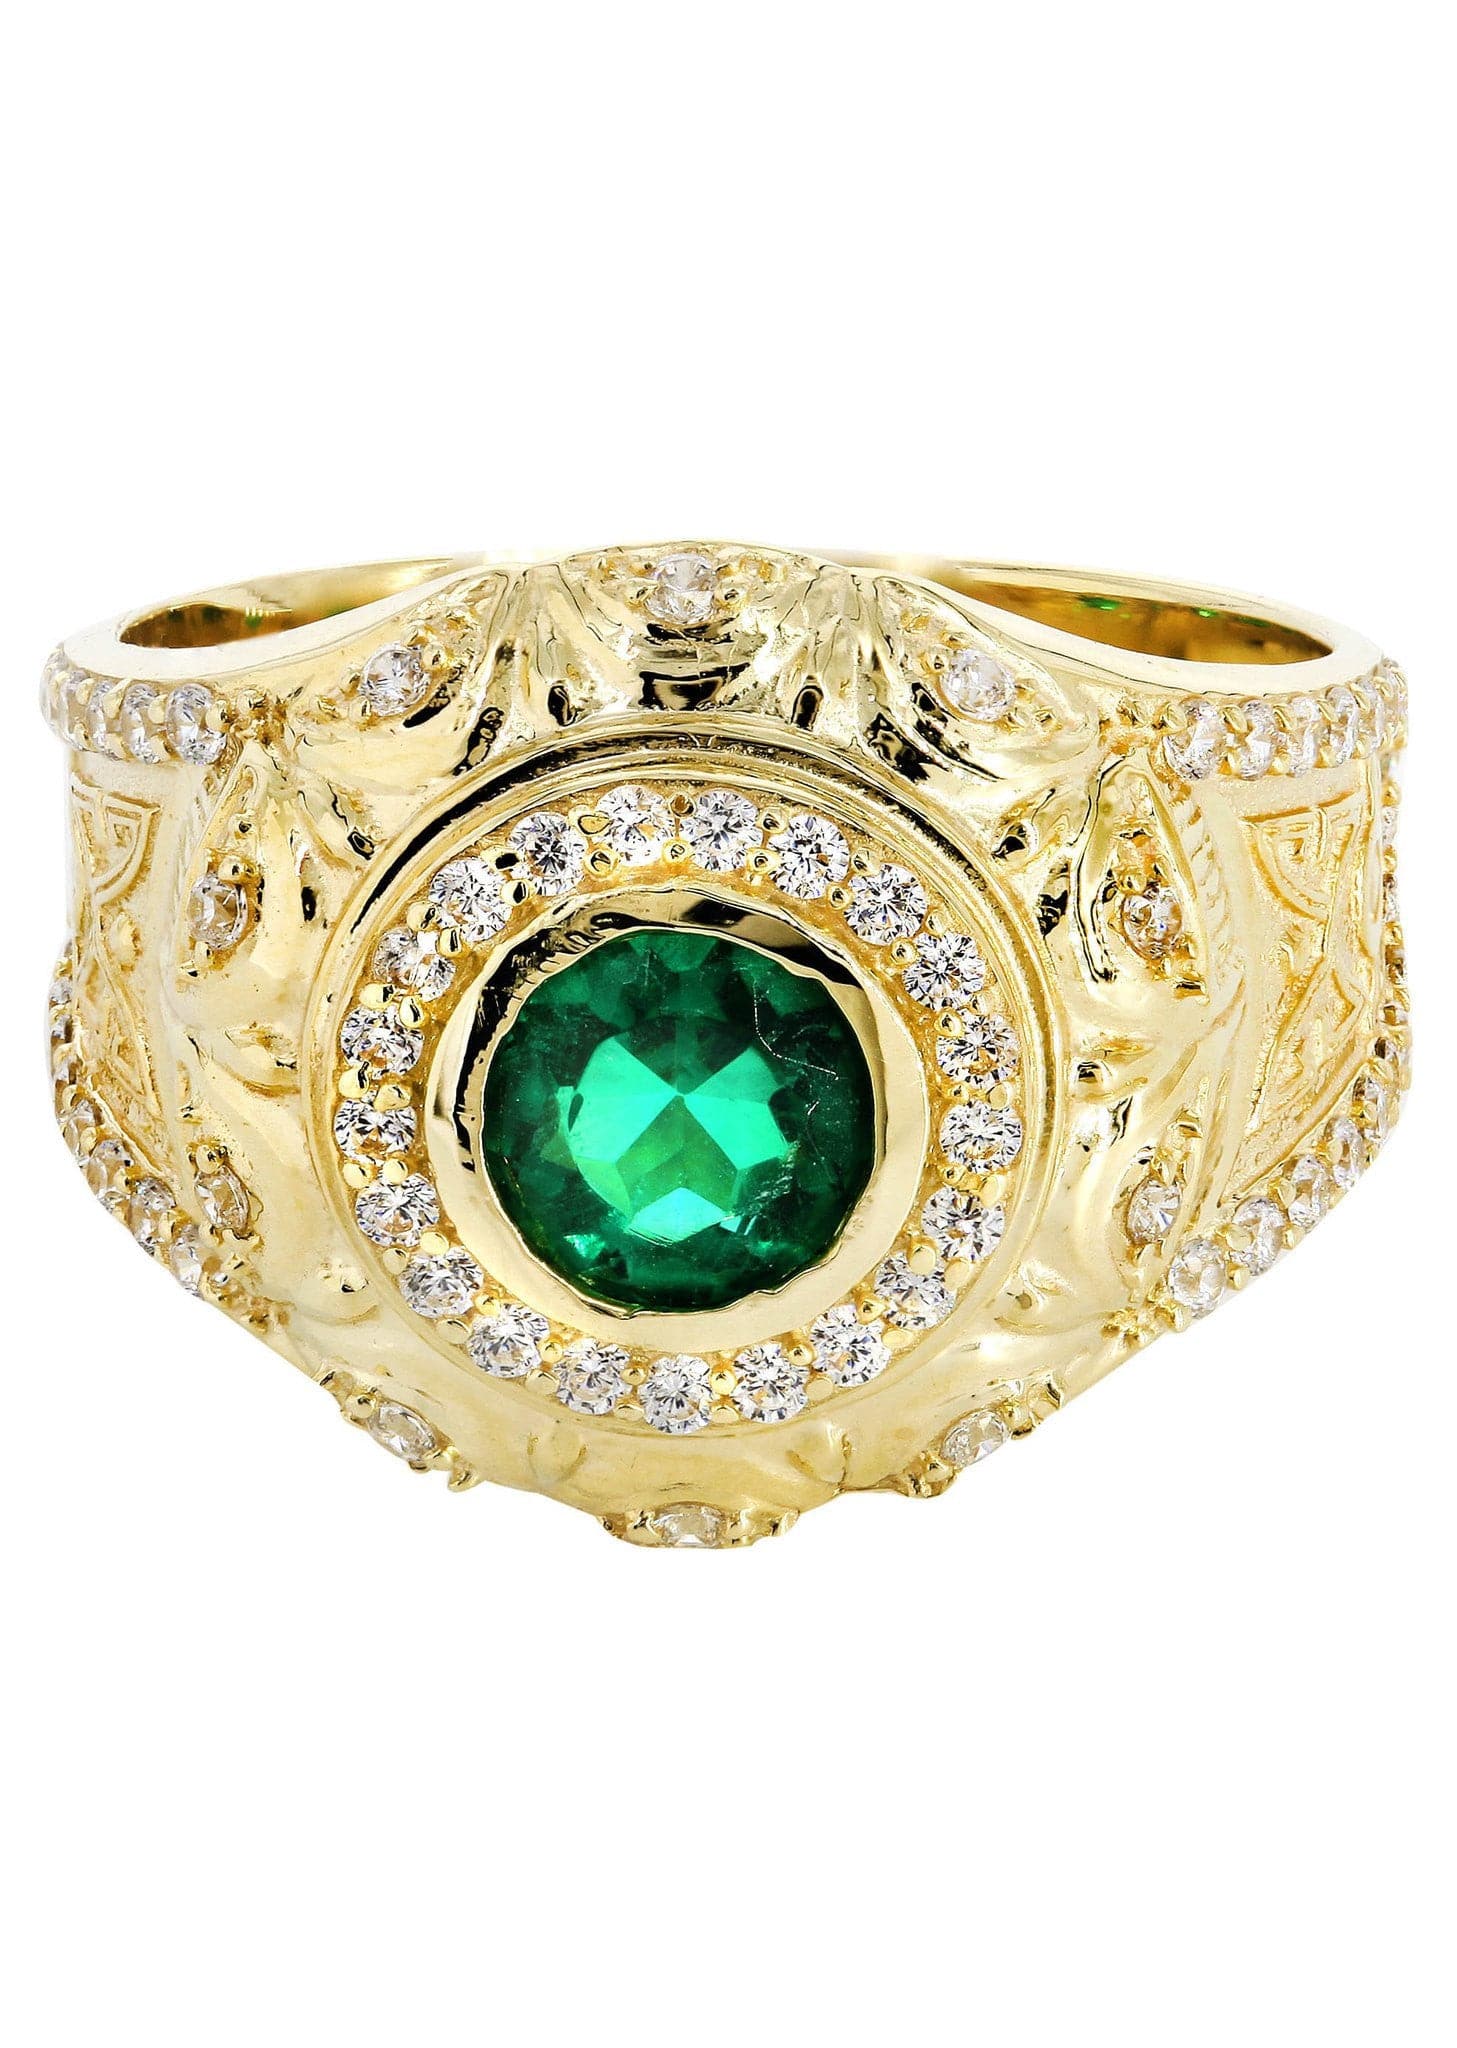 Buy Gold Jewellery Online | Latest Designs at Best Price